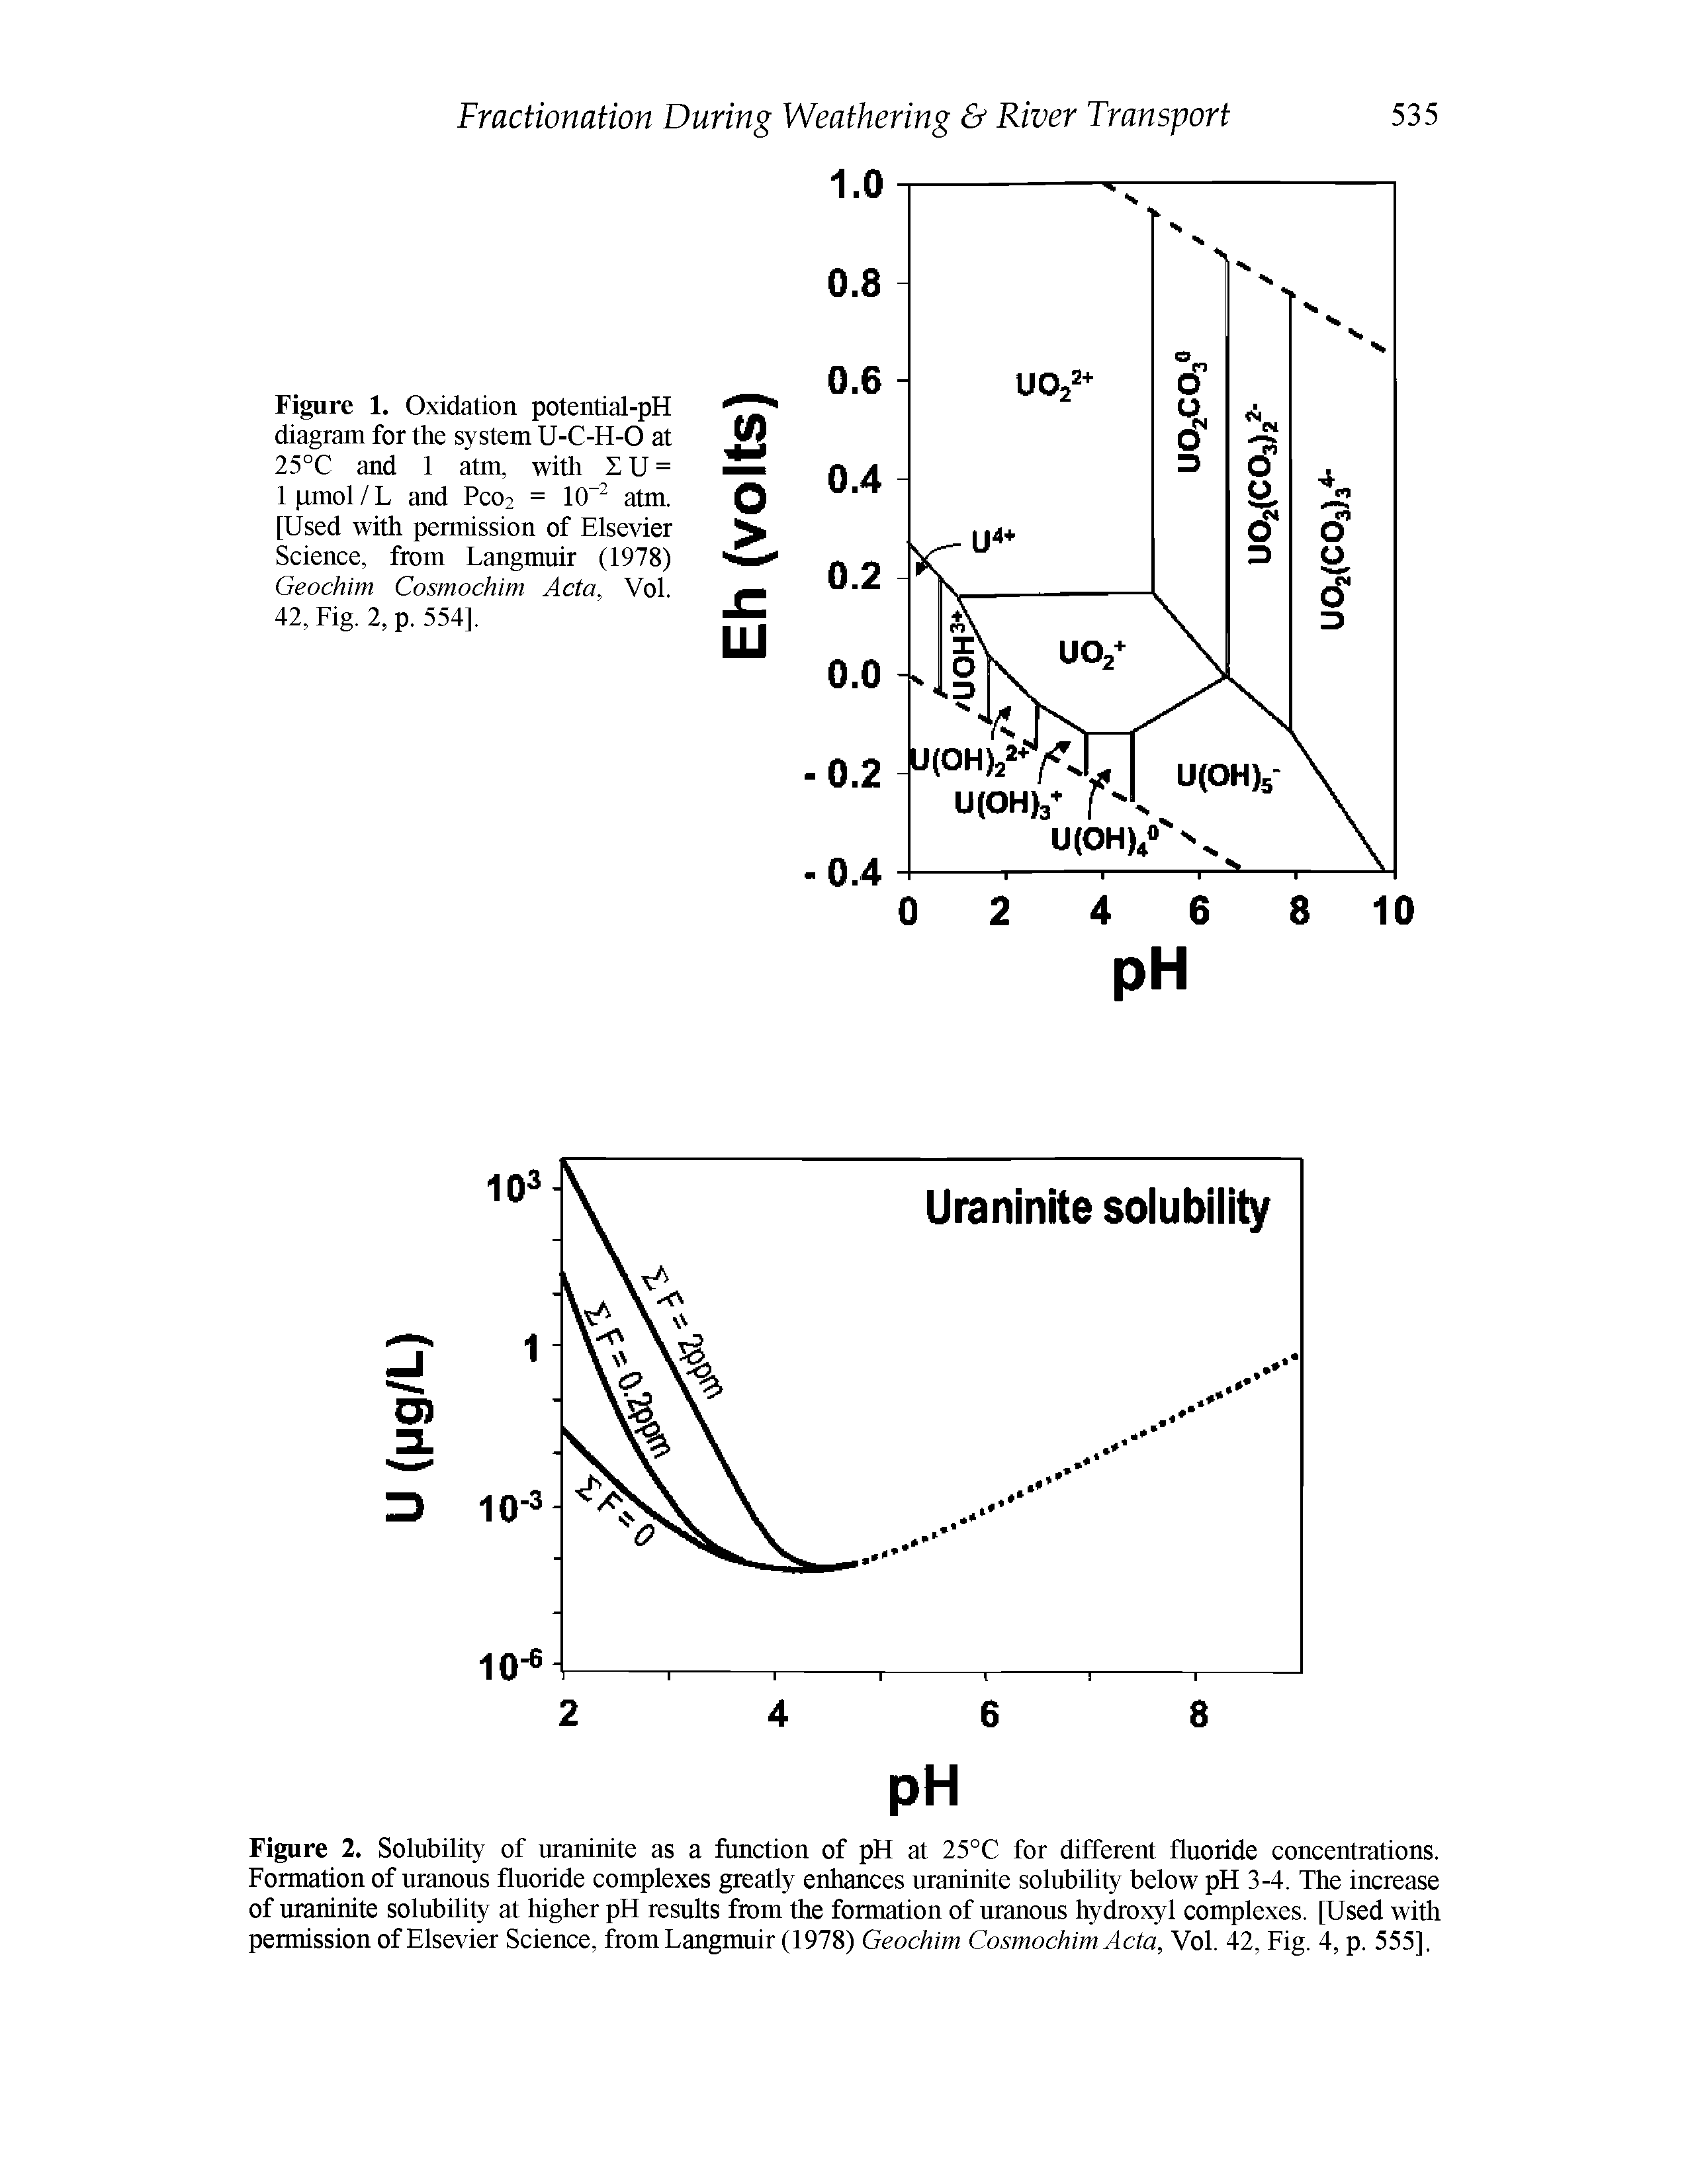 Figure 2. Solubility of maninite as a function of pH at 25°C for different fluoride concentrations. Formation of uranous fluoride complexes greatly enhances maninite solubility below pH 3-4. The increase of maninite solubility at higher pH results from the formation of uranous hydroxyl complexes. [Used with permission of Elsevier Science, fromLangmuir (1978) Geochim Cosmochim Acta, Vol. 42, Fig. 4, p. 555].